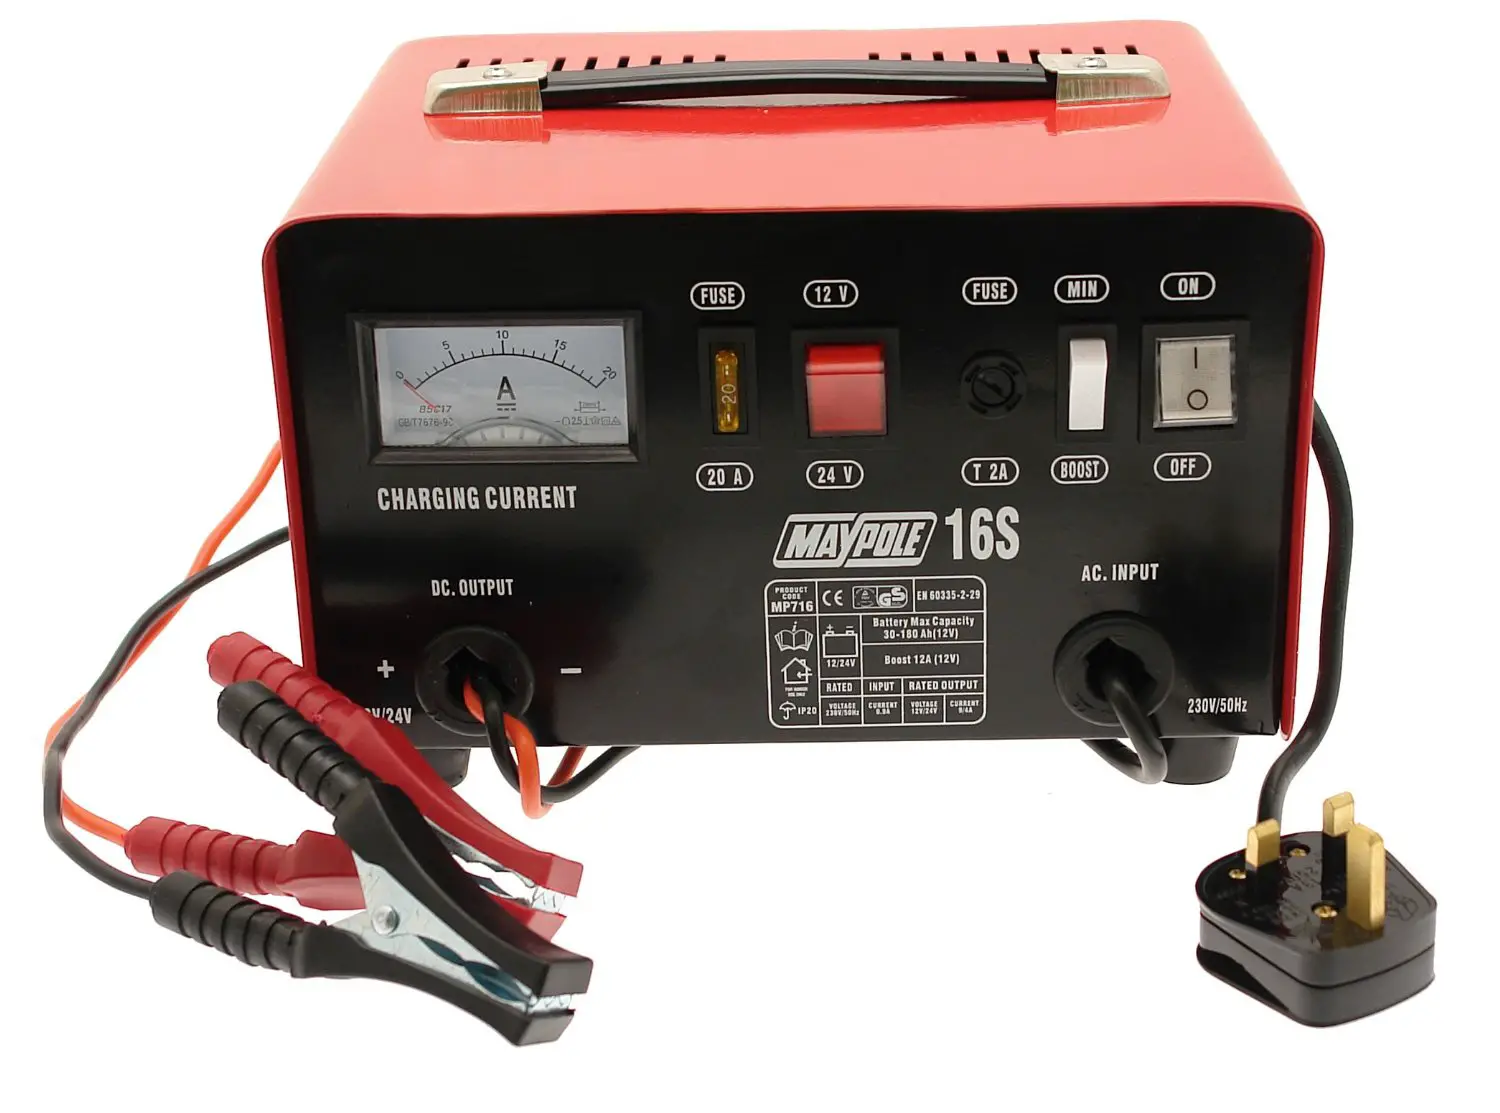 How to use a car battery charger